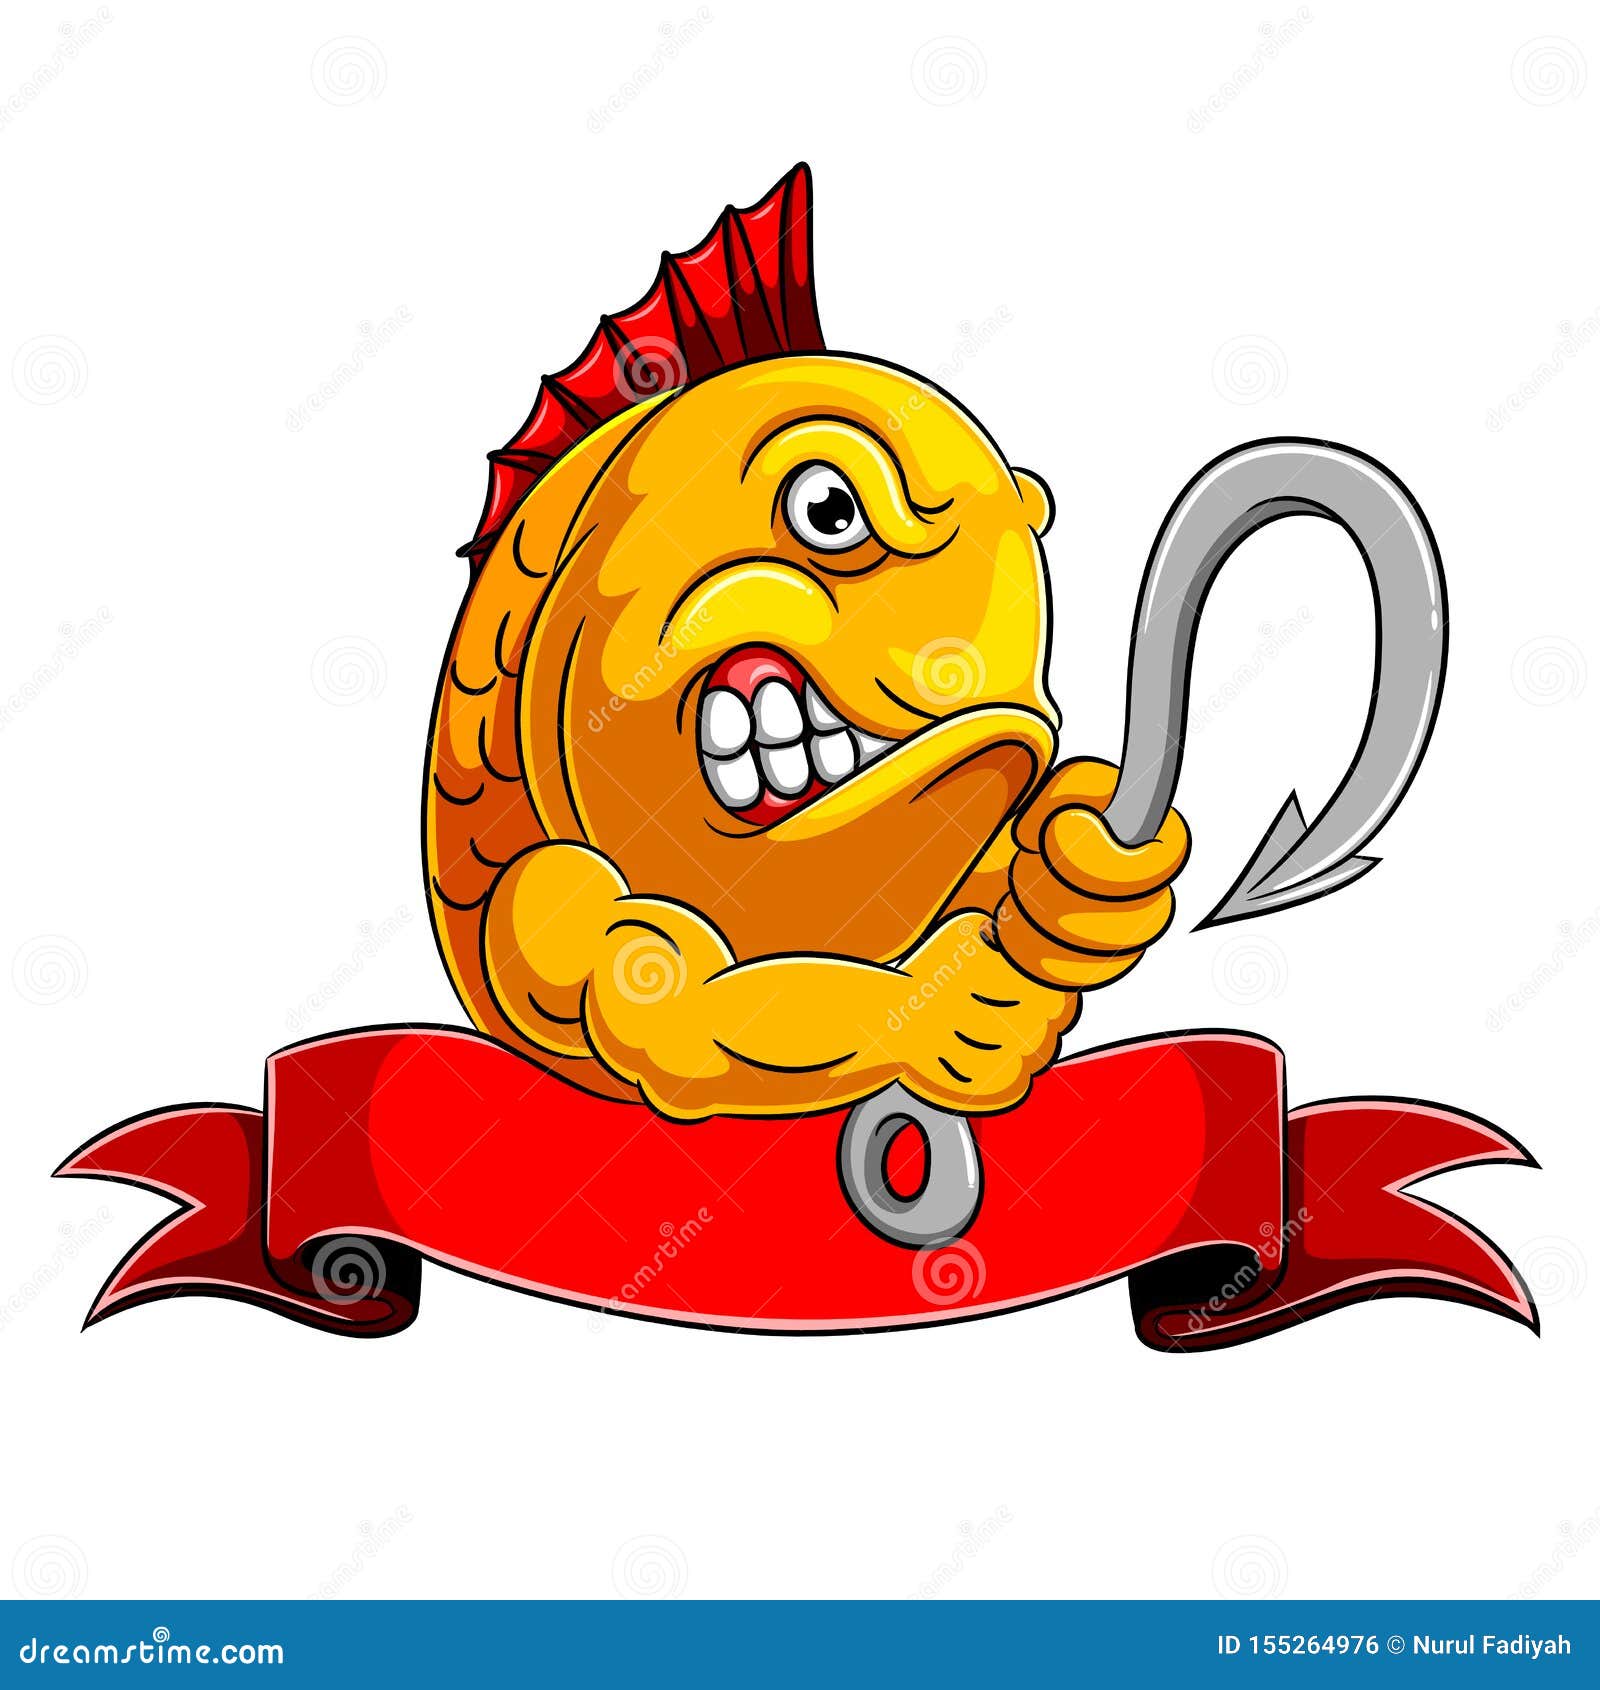 https://thumbs.dreamstime.com/z/angry-fish-holding-hook-illustration-155264976.jpg